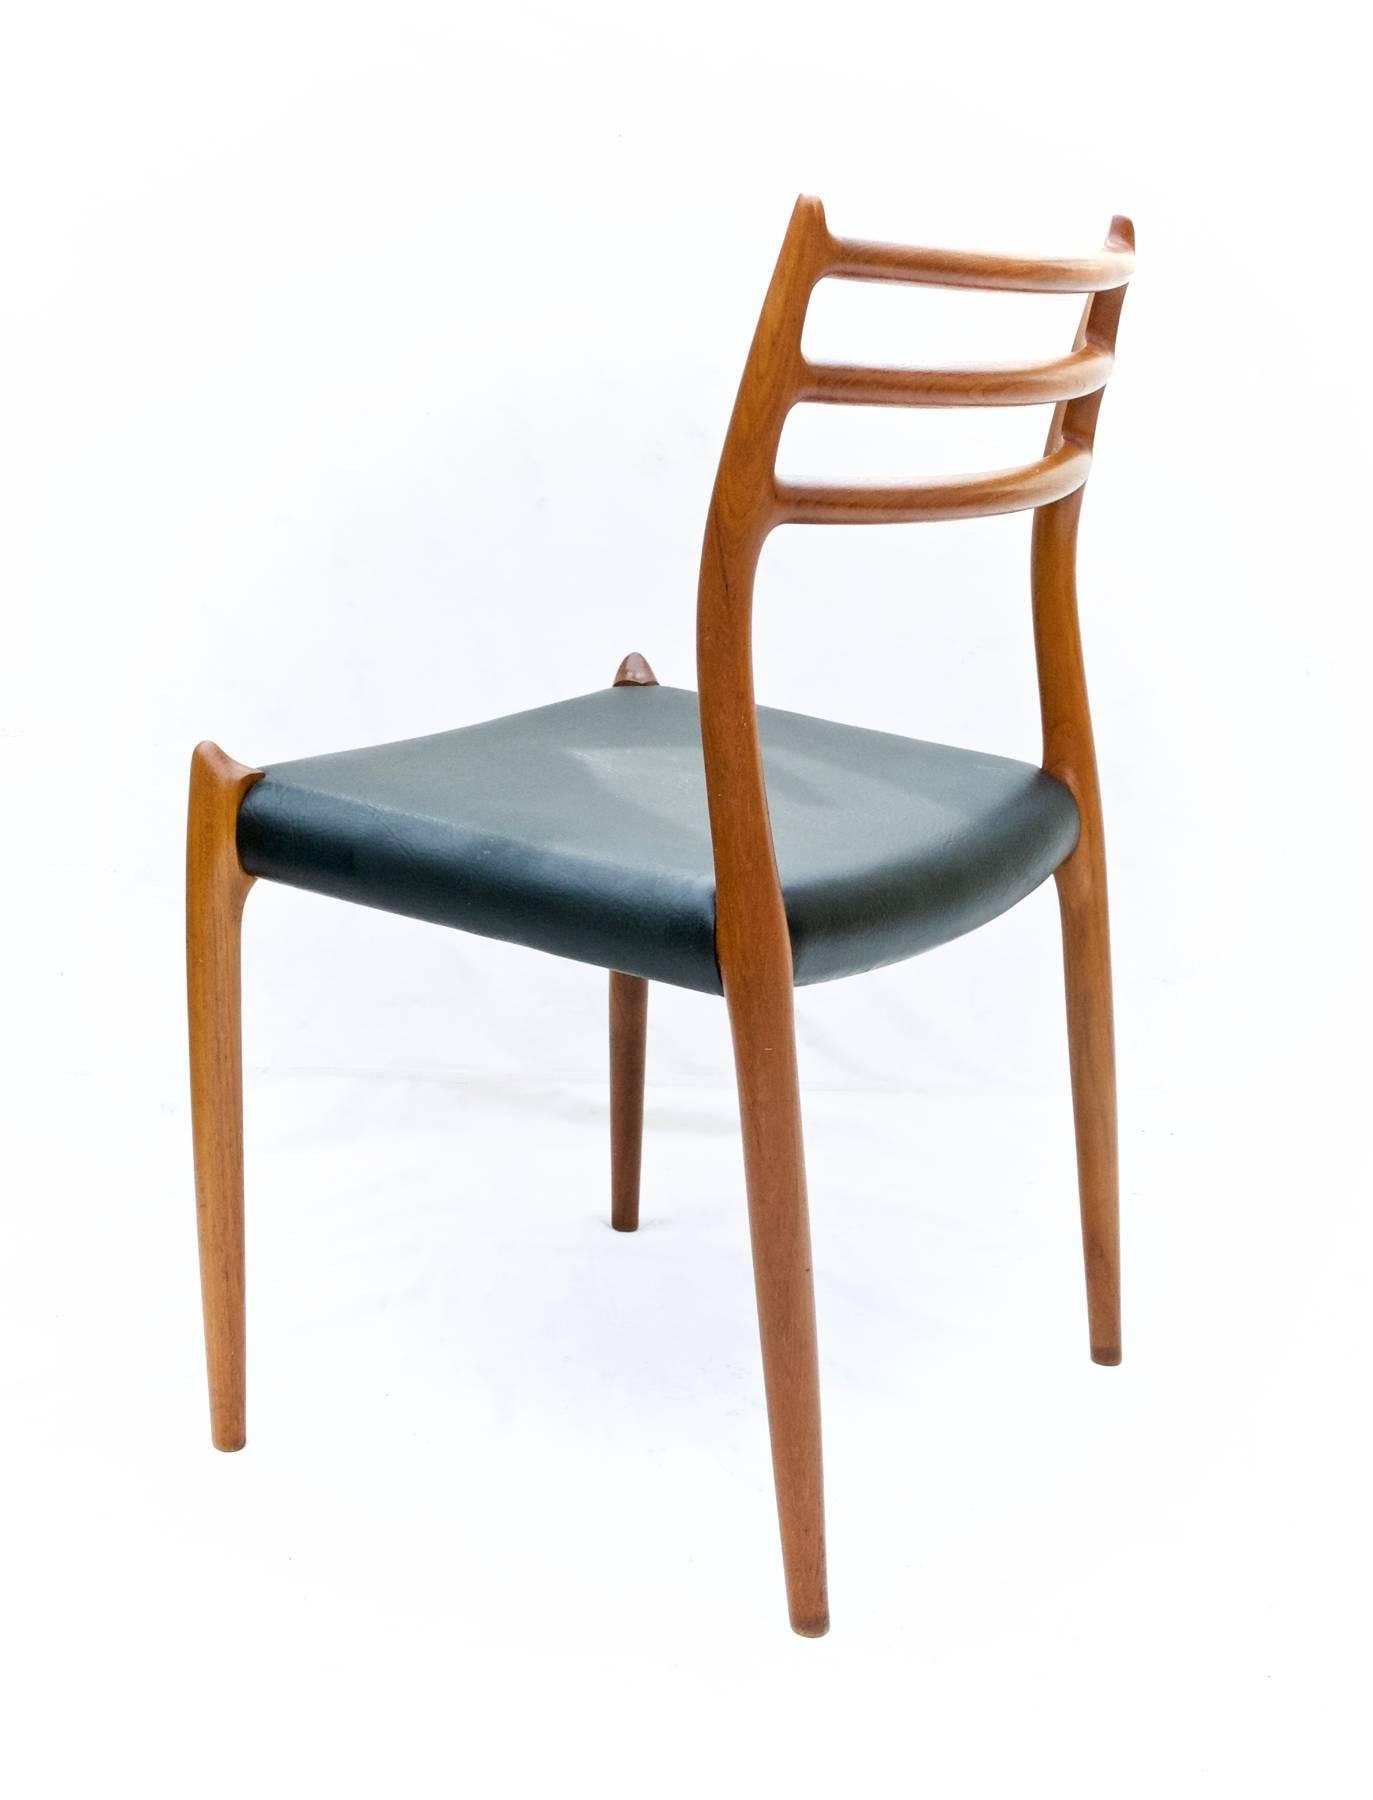 N.O. Moller Model 78 Danish Modern Dining Chairs in Teak, Pair In Excellent Condition For Sale In Charlottesville, VA